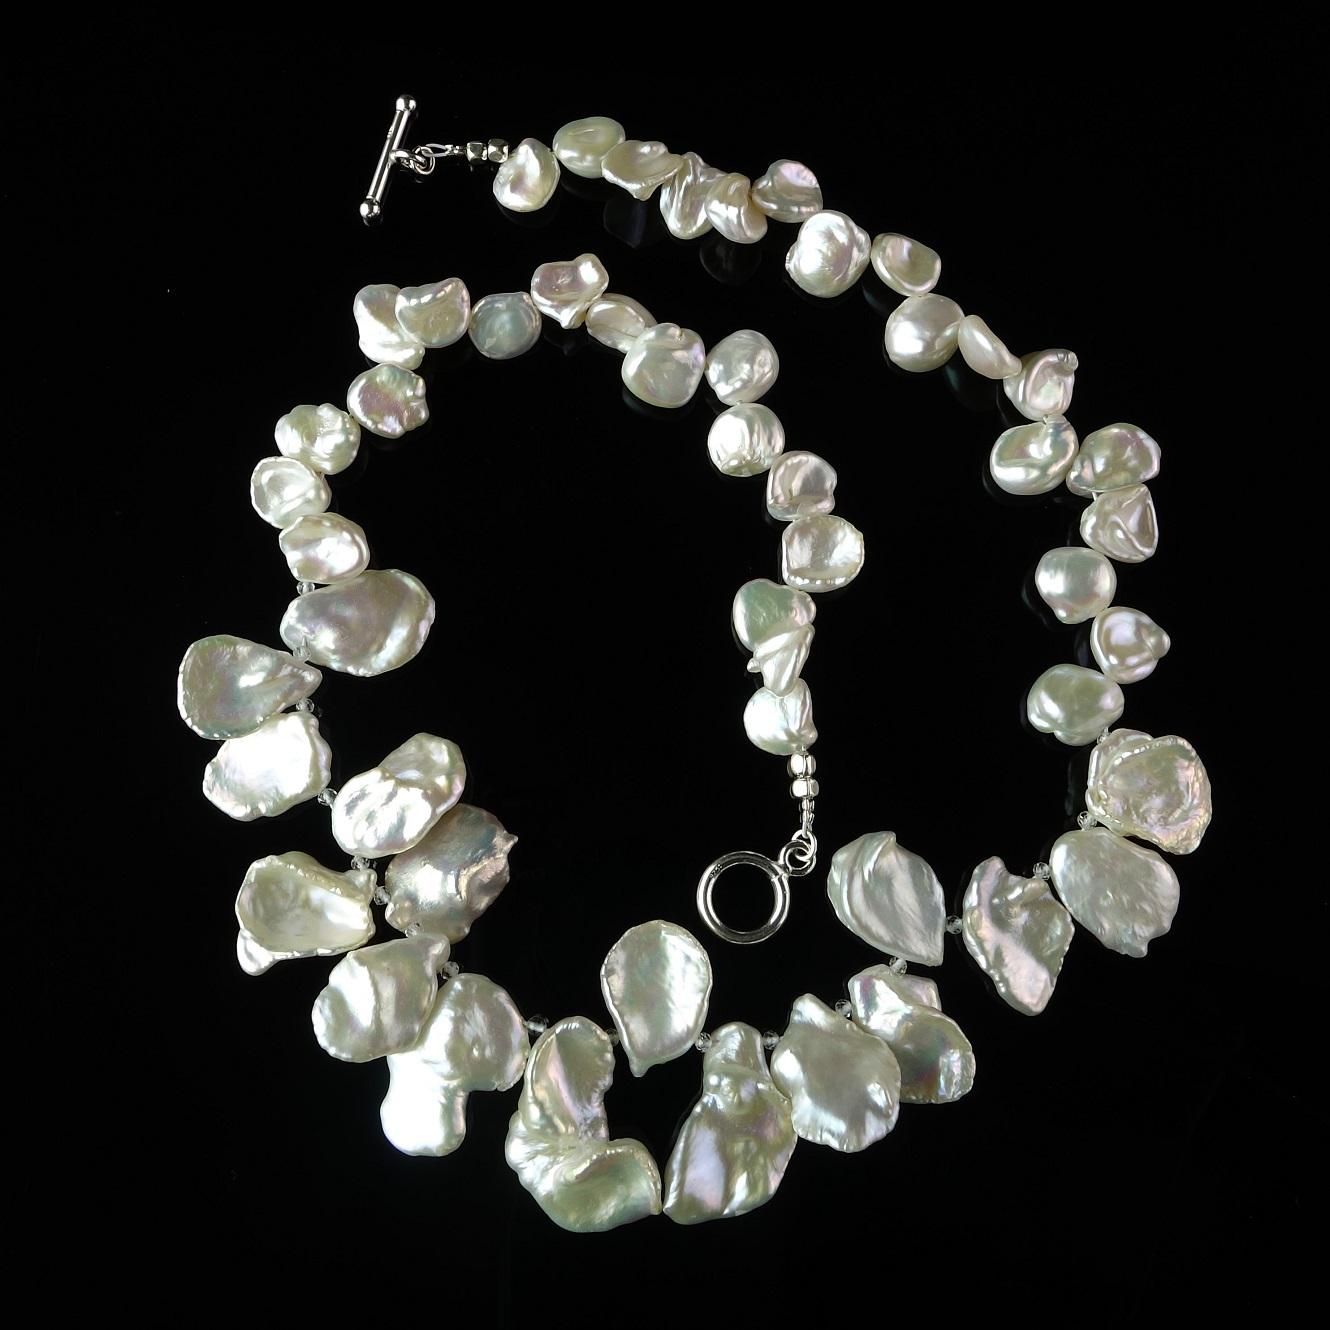 Women's or Men's AJD Collar White Iridescent Keshi Pearls Sterling Toggle June Birthstone